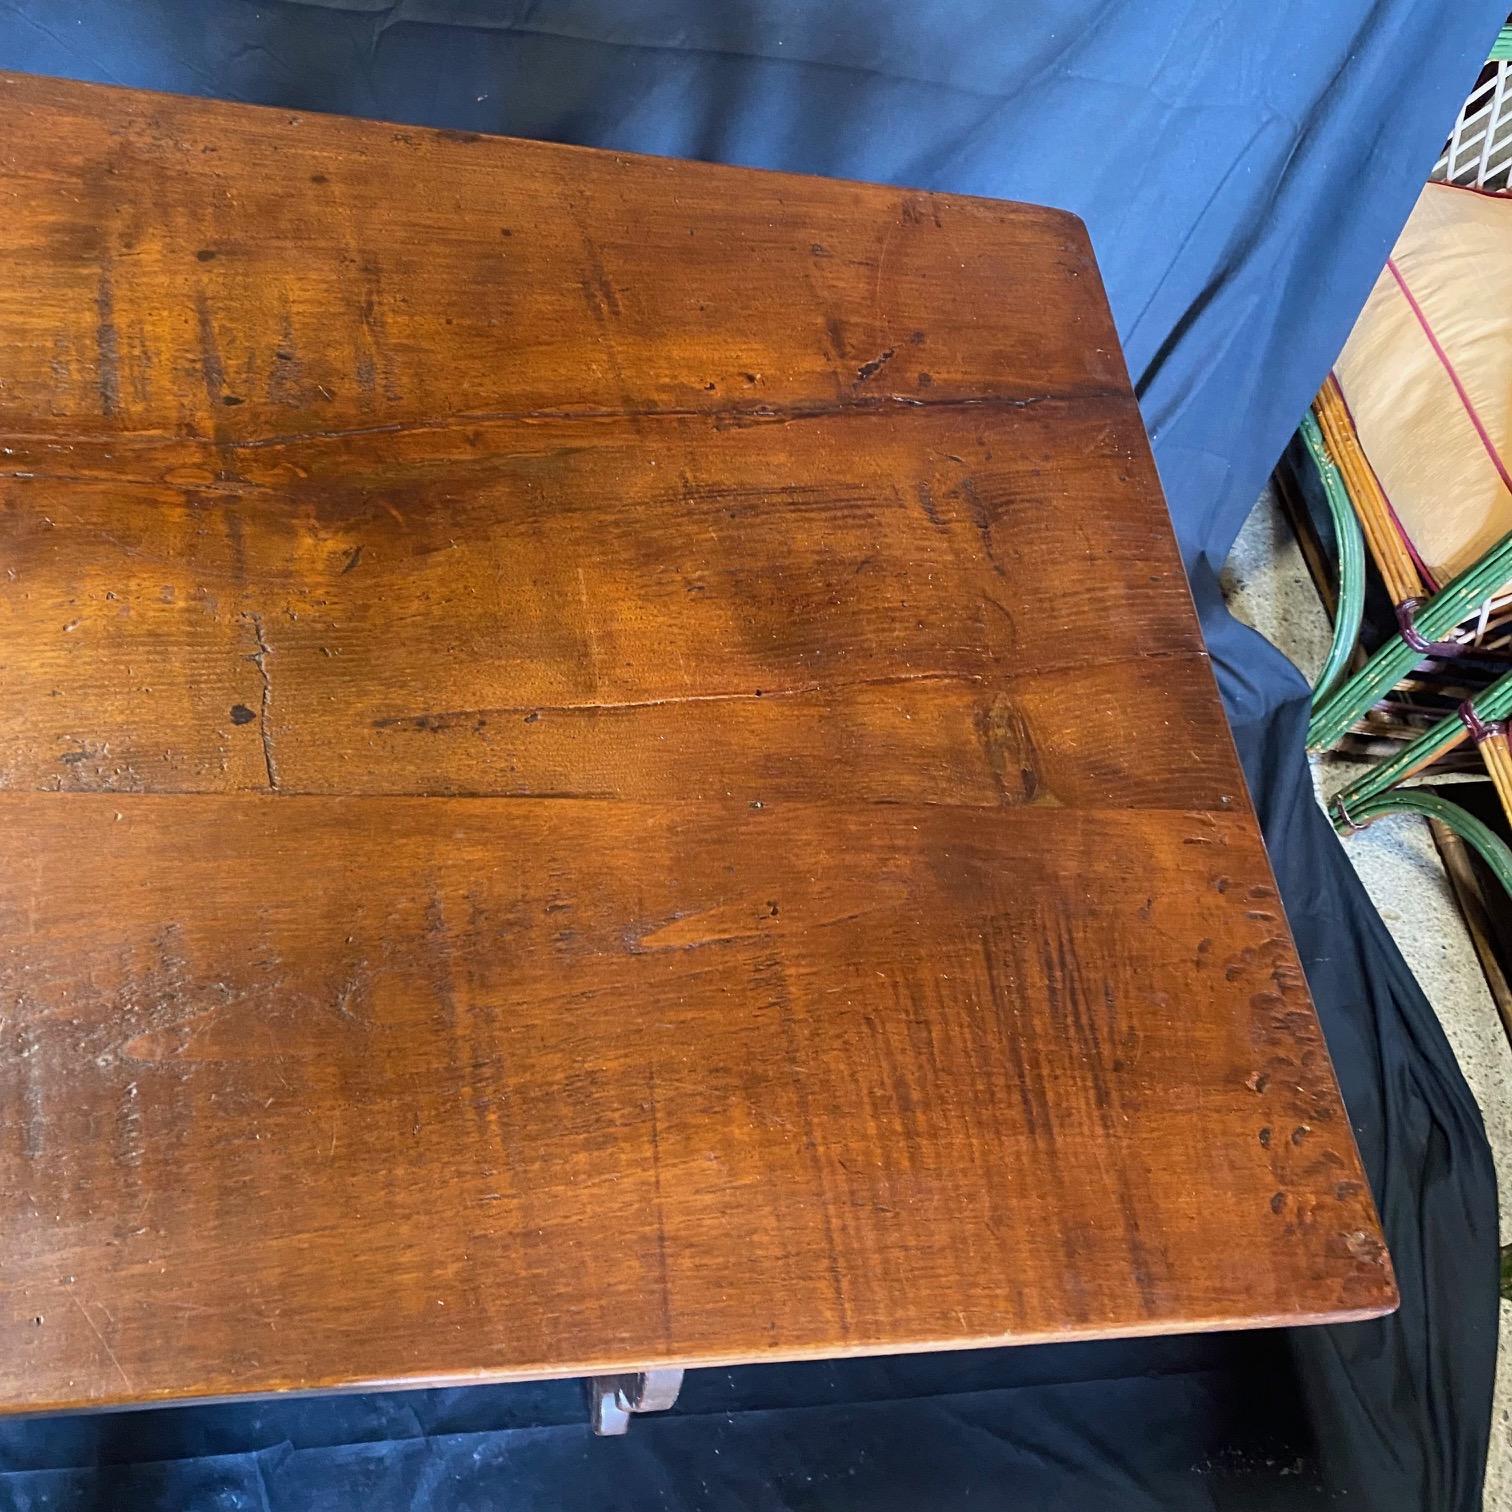 Bought in France, this lovely Italian dining table boasts hand made wrought-iron stretchers from the 19th century. This classic walnut table features a sturdy rectangular top sitting above an exquisite base made of splayed carved legs connected to